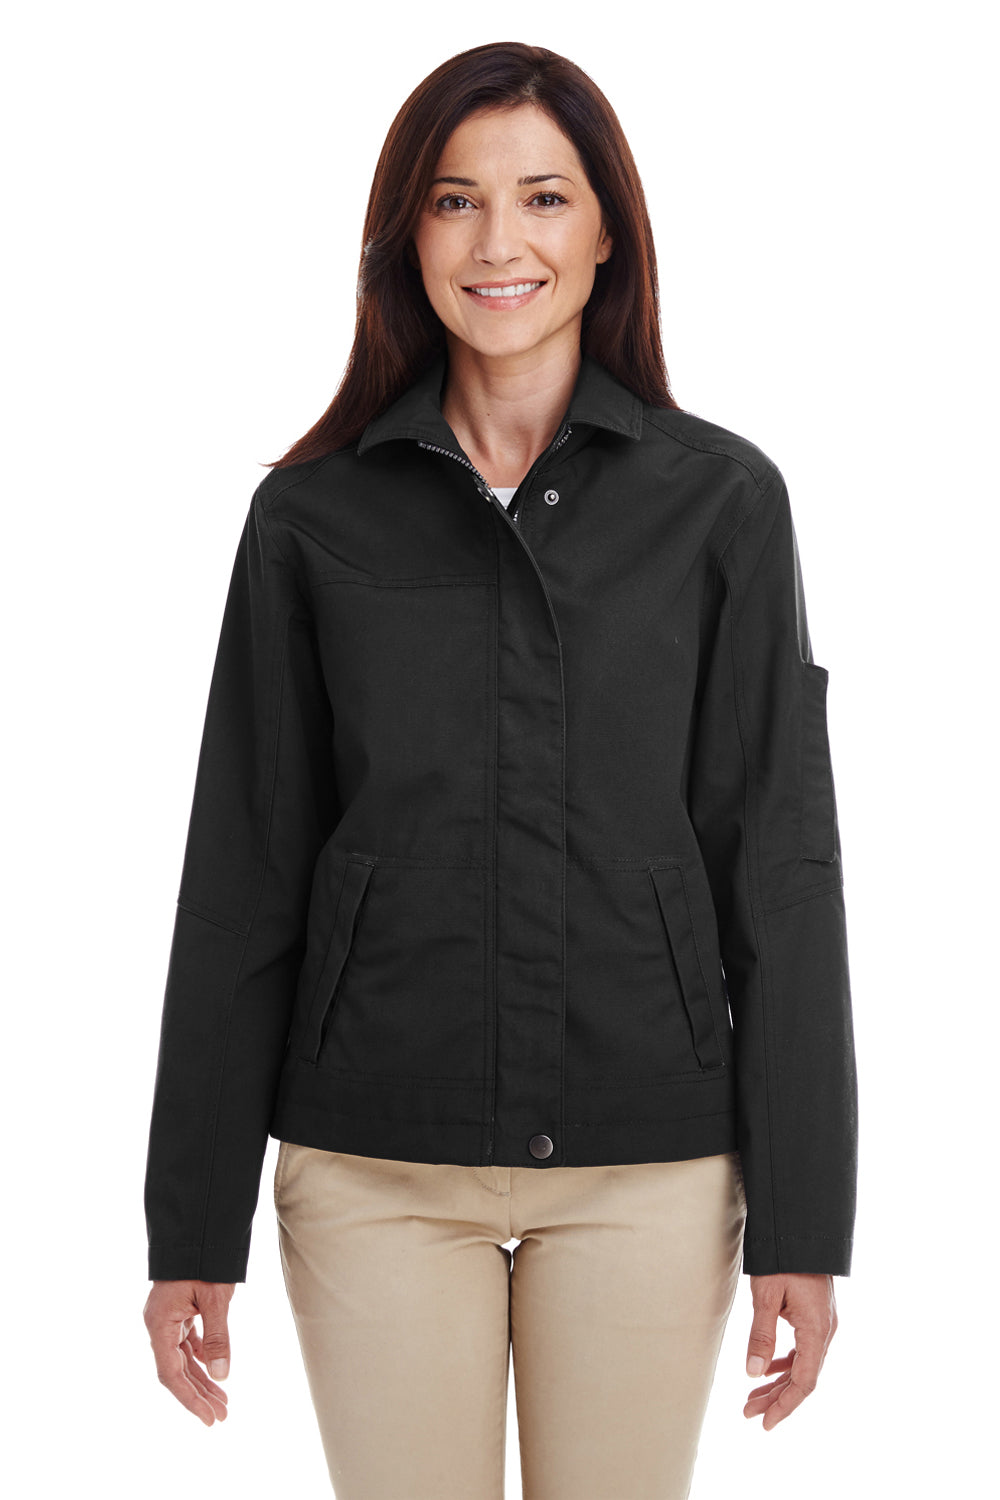 Harriton M705W Womens Auxiliary Water Resistant Canvas Full Zip Jacket Black Front